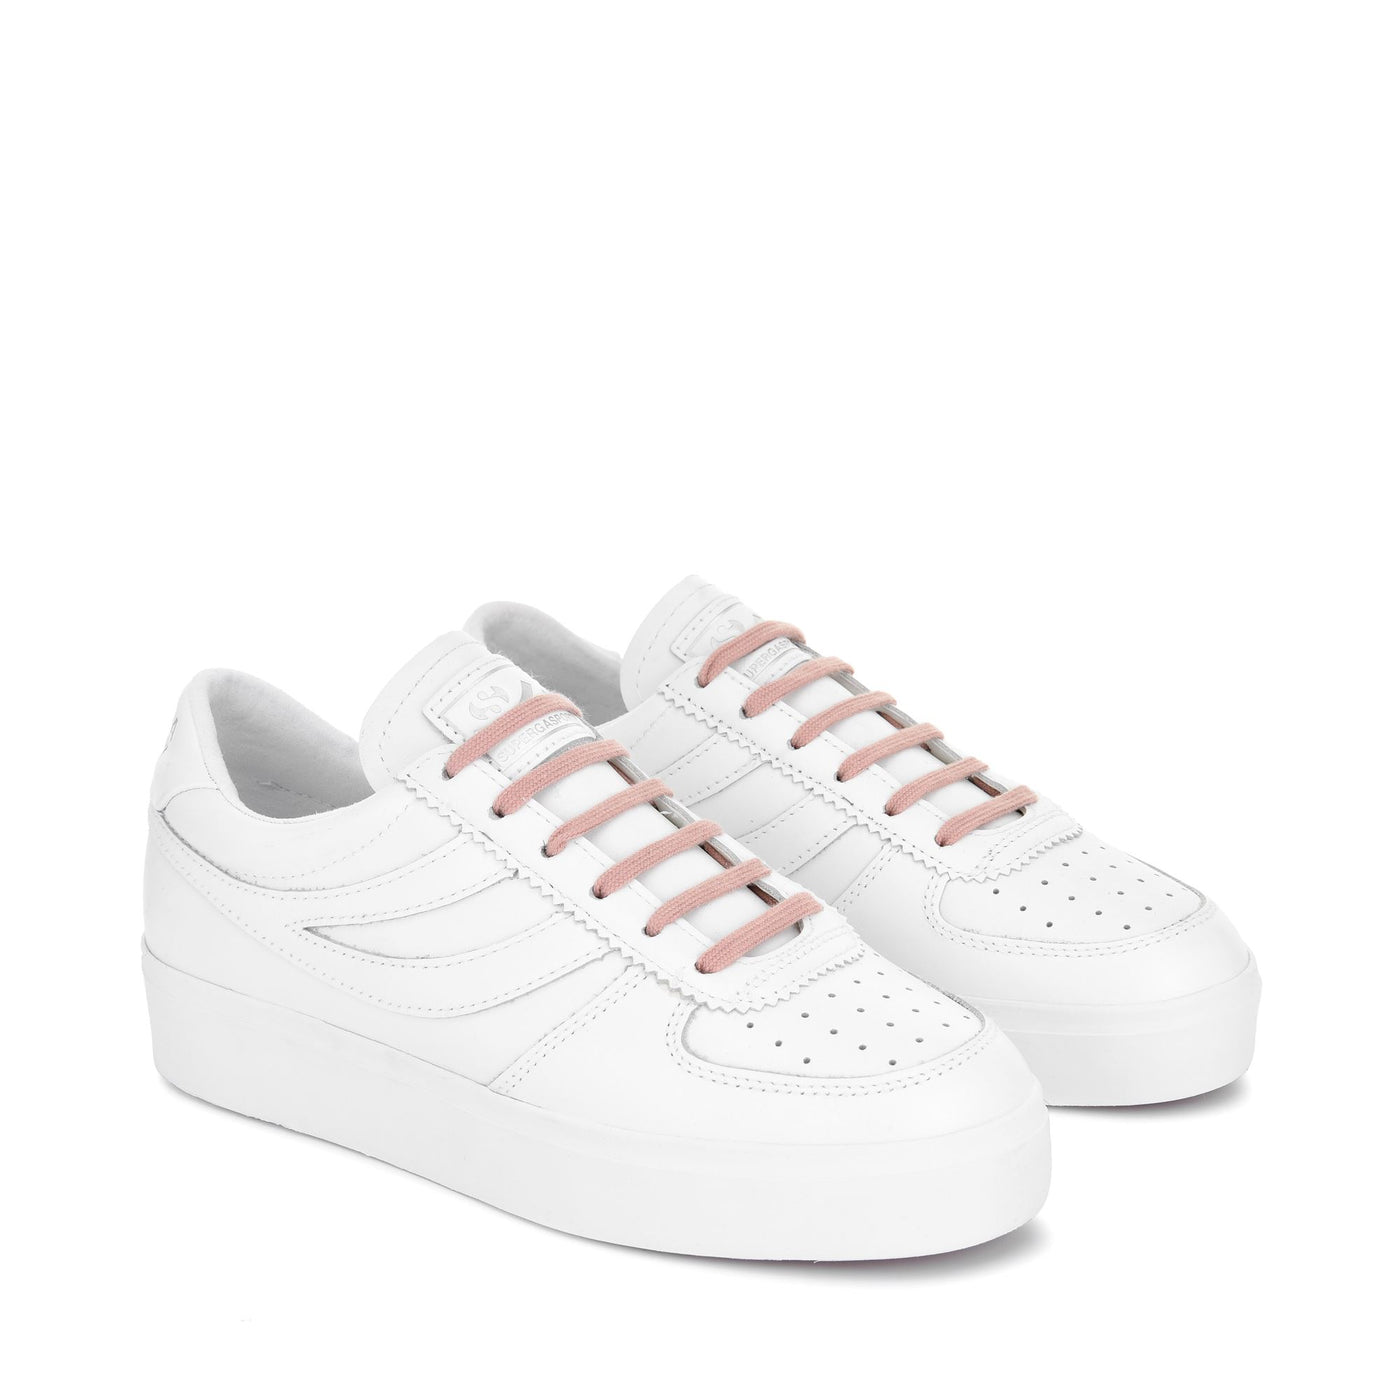 Sneakers Woman 2850 SEATTLE 3 COMFORT LEATHER Wedge WHITE-SILVER-PINK SMOKE Dressed Front (jpg Rgb)	